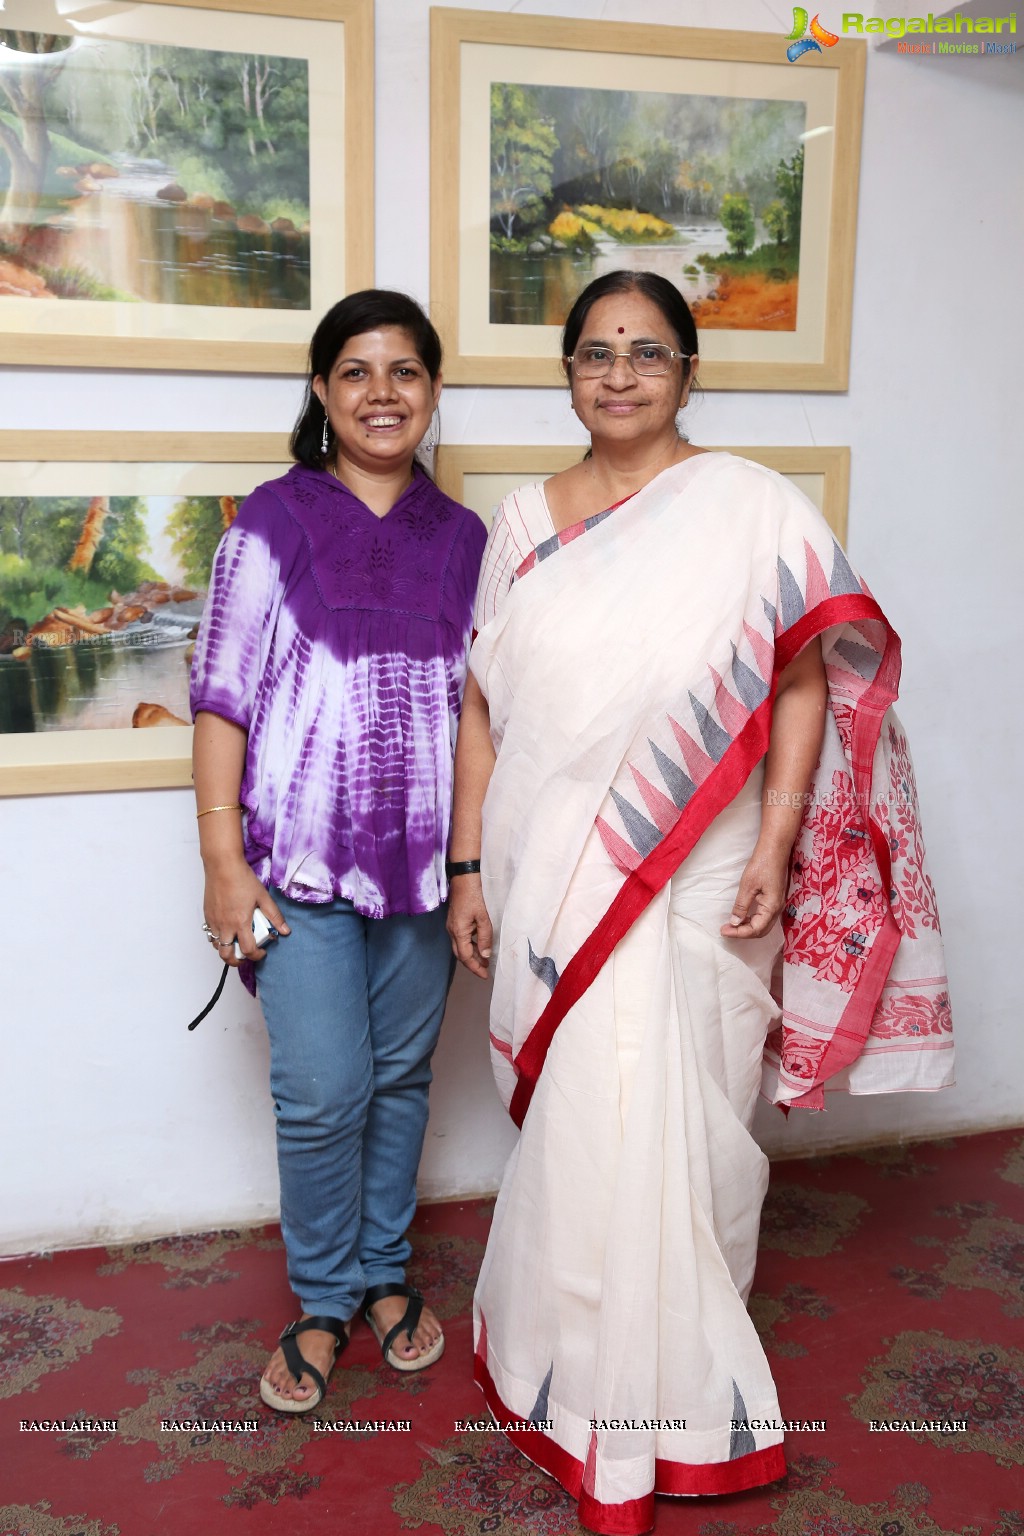 Art Exhibition of Dr. Chandramouly at Pegasus Art Gallery, Hyderabad